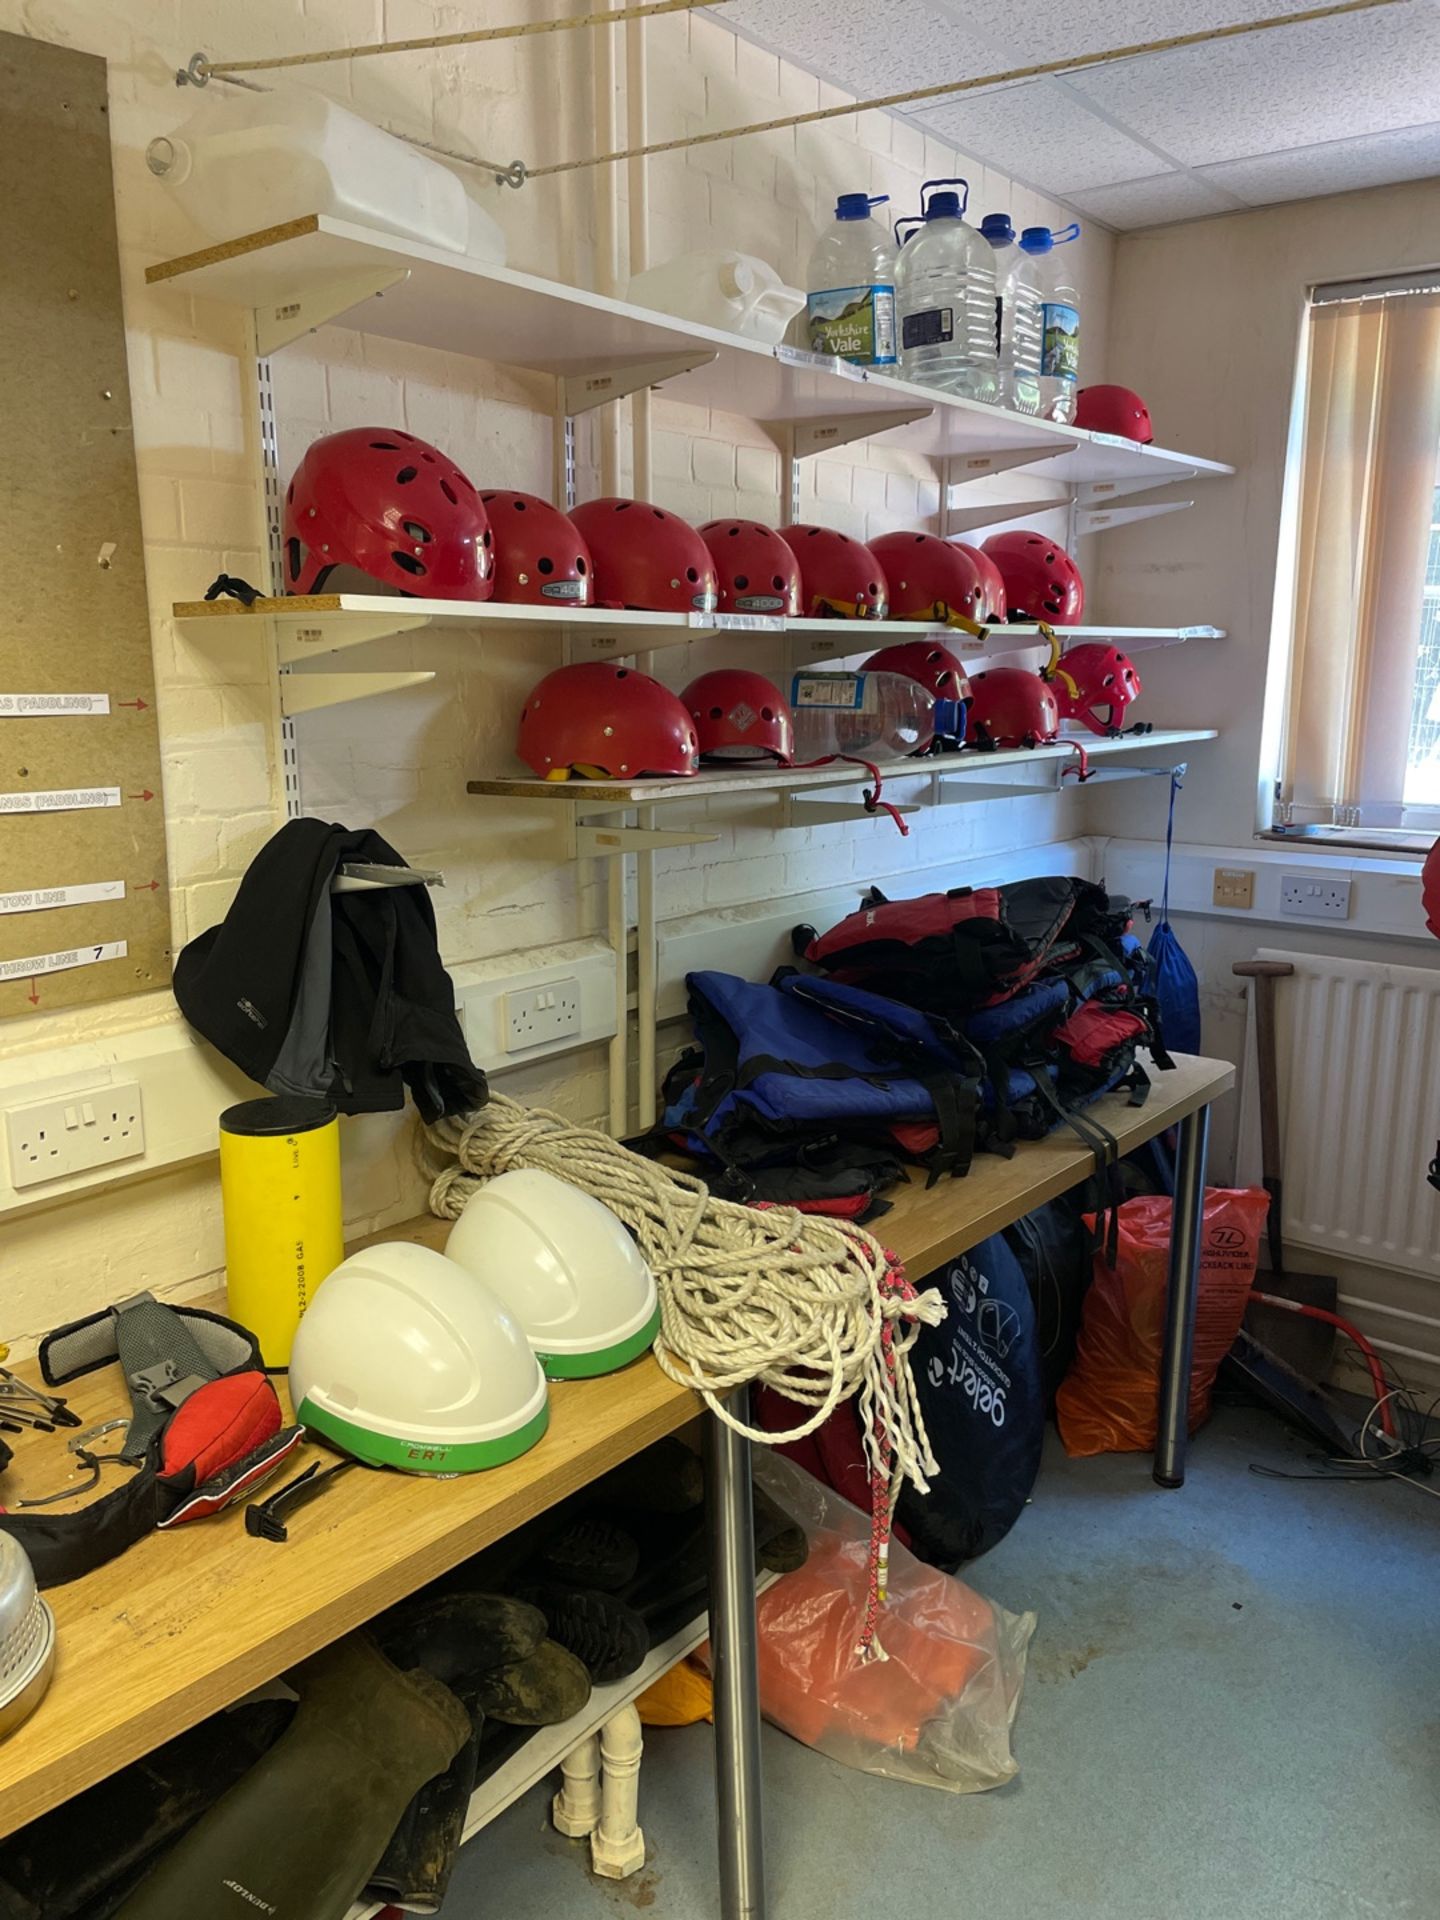 Contents Of Outdoor Pursuits Room - Image 4 of 10